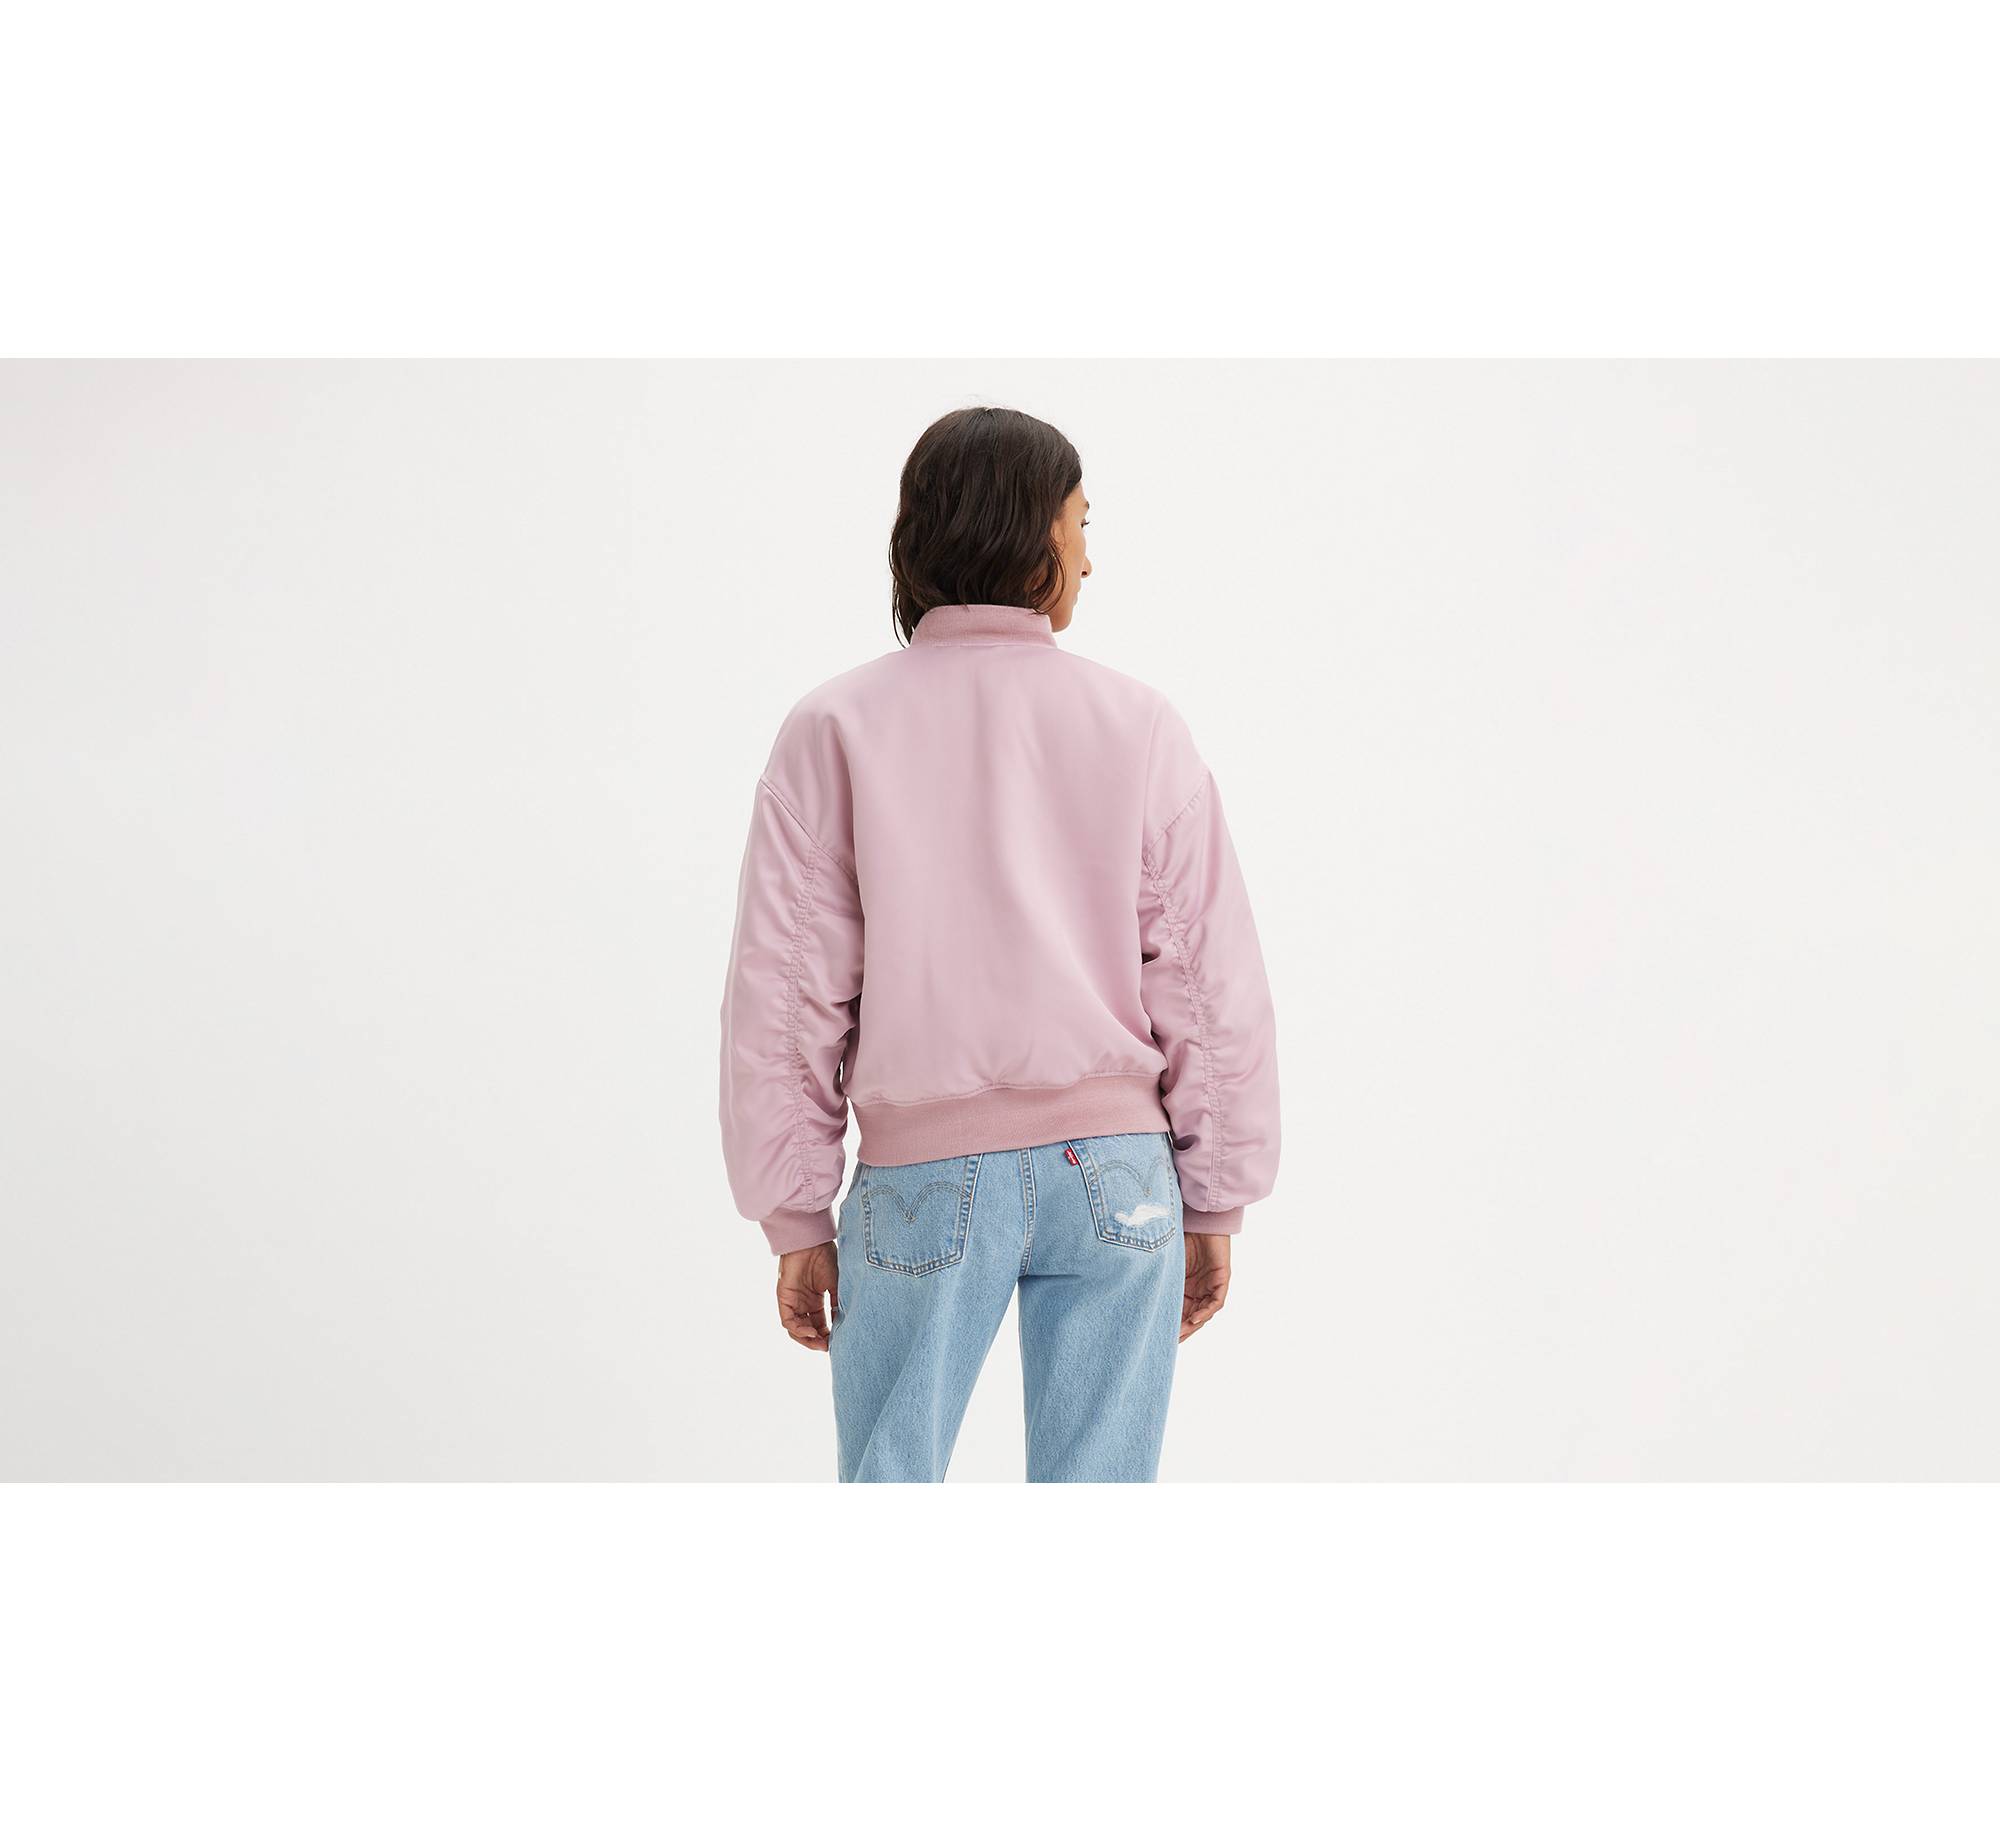 Andy Techy Jacket - Pink | Levi's® US